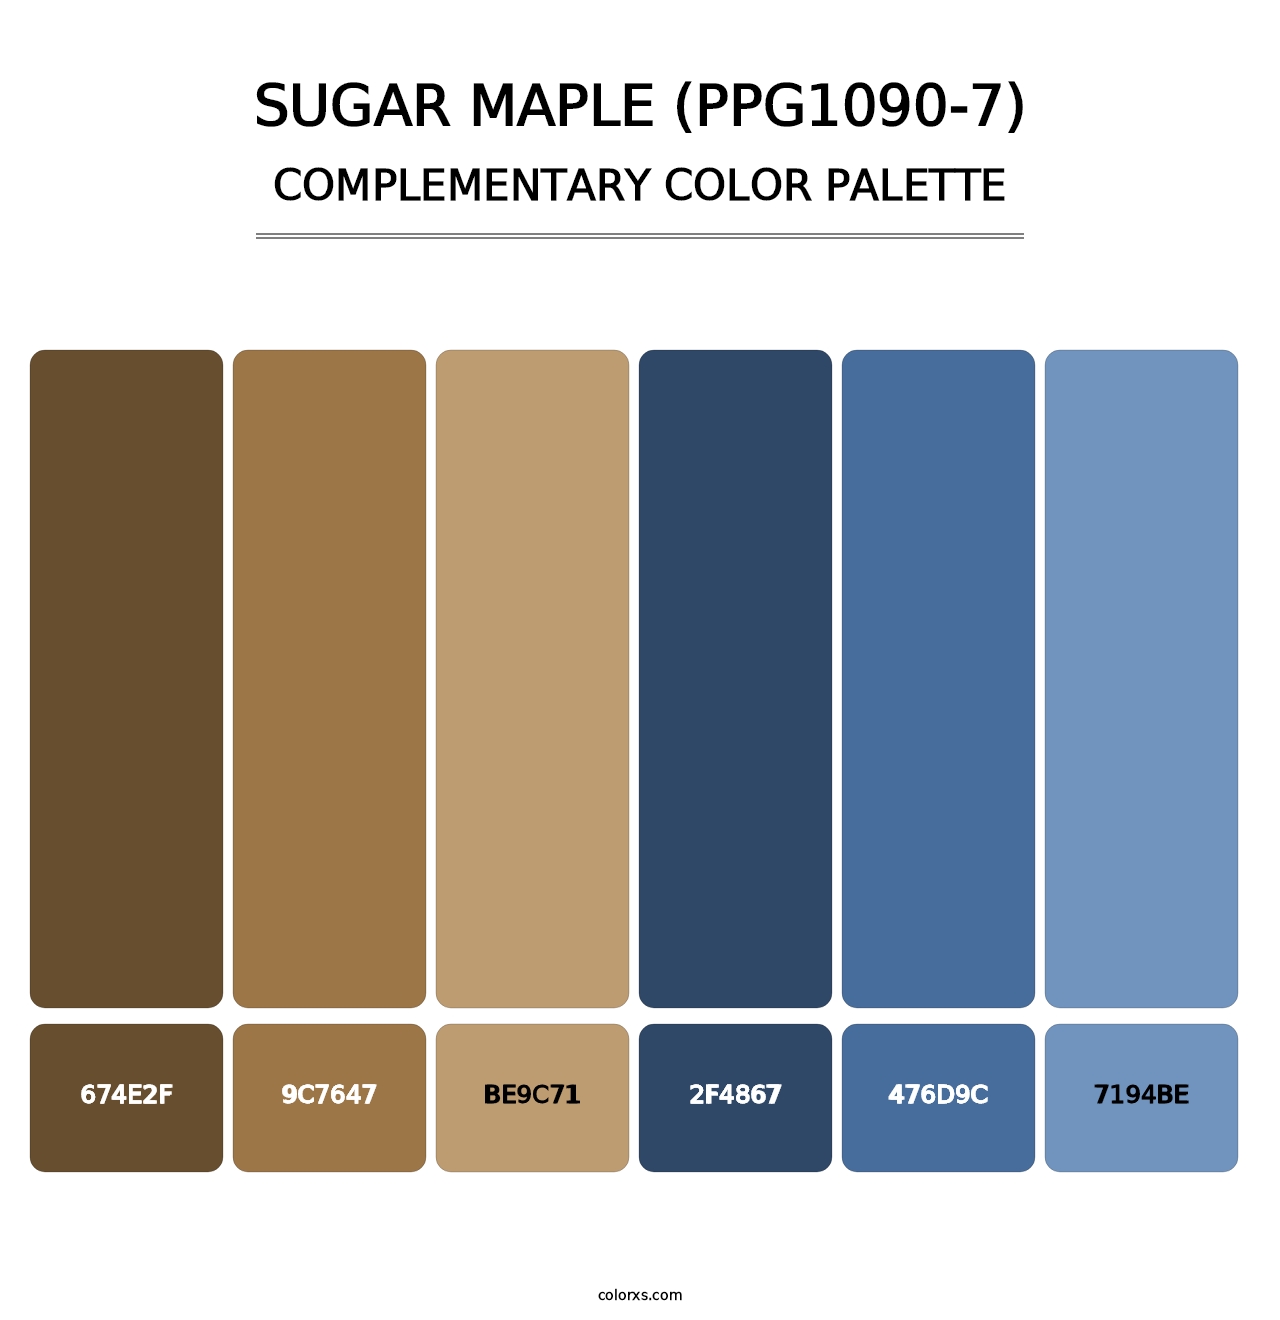 Sugar Maple (PPG1090-7) - Complementary Color Palette